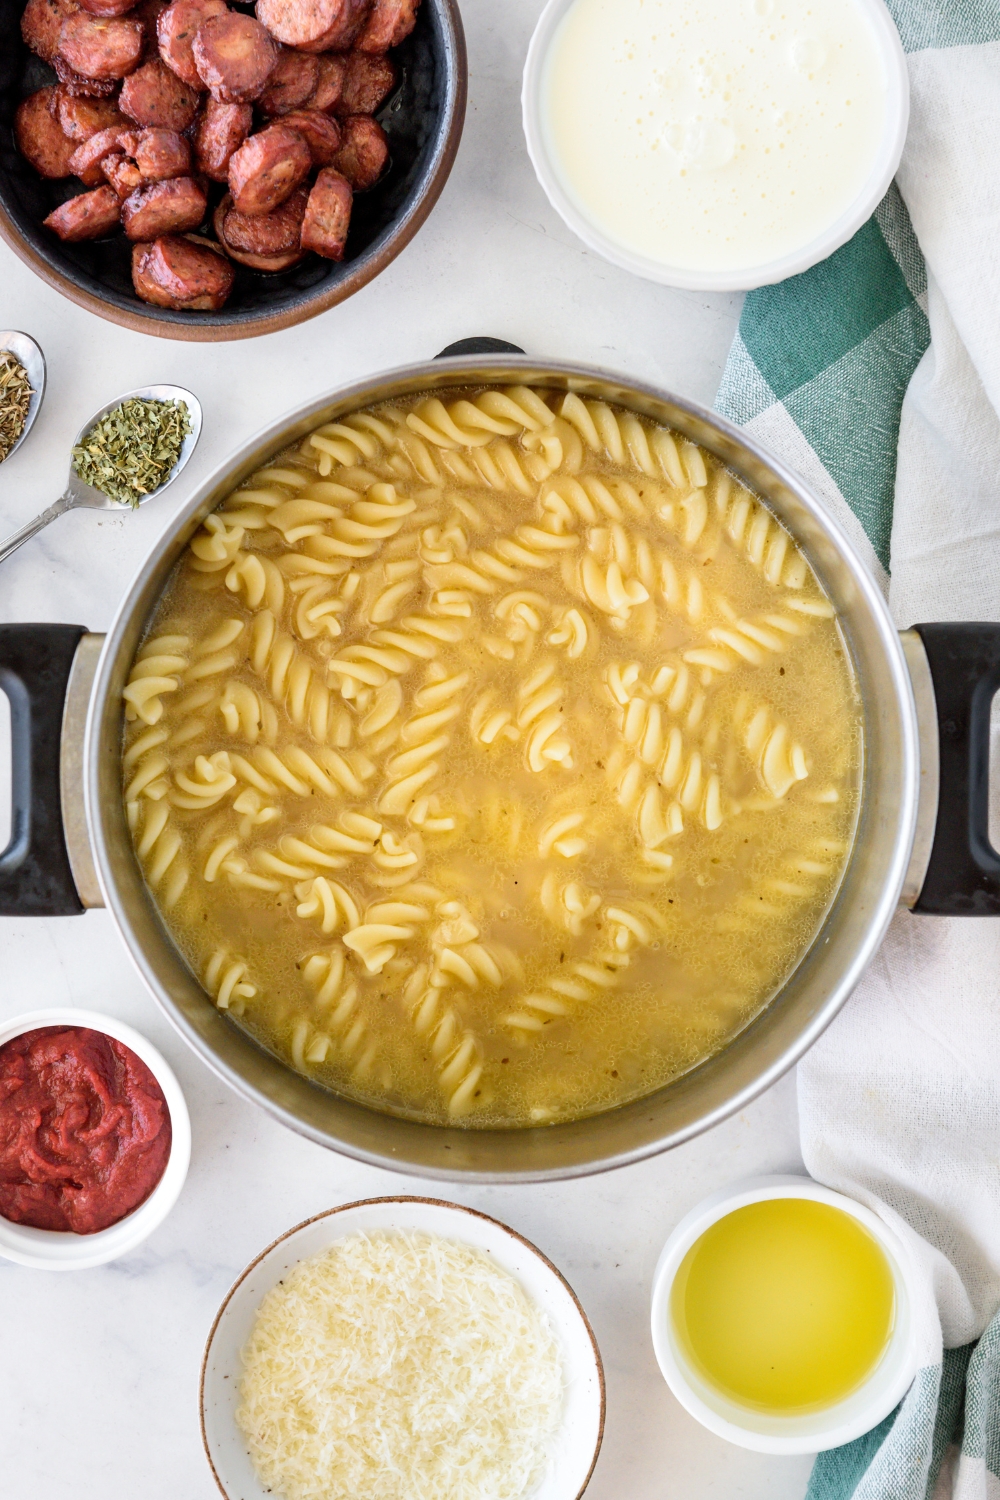 A pot with pasta noodles cooking in it.